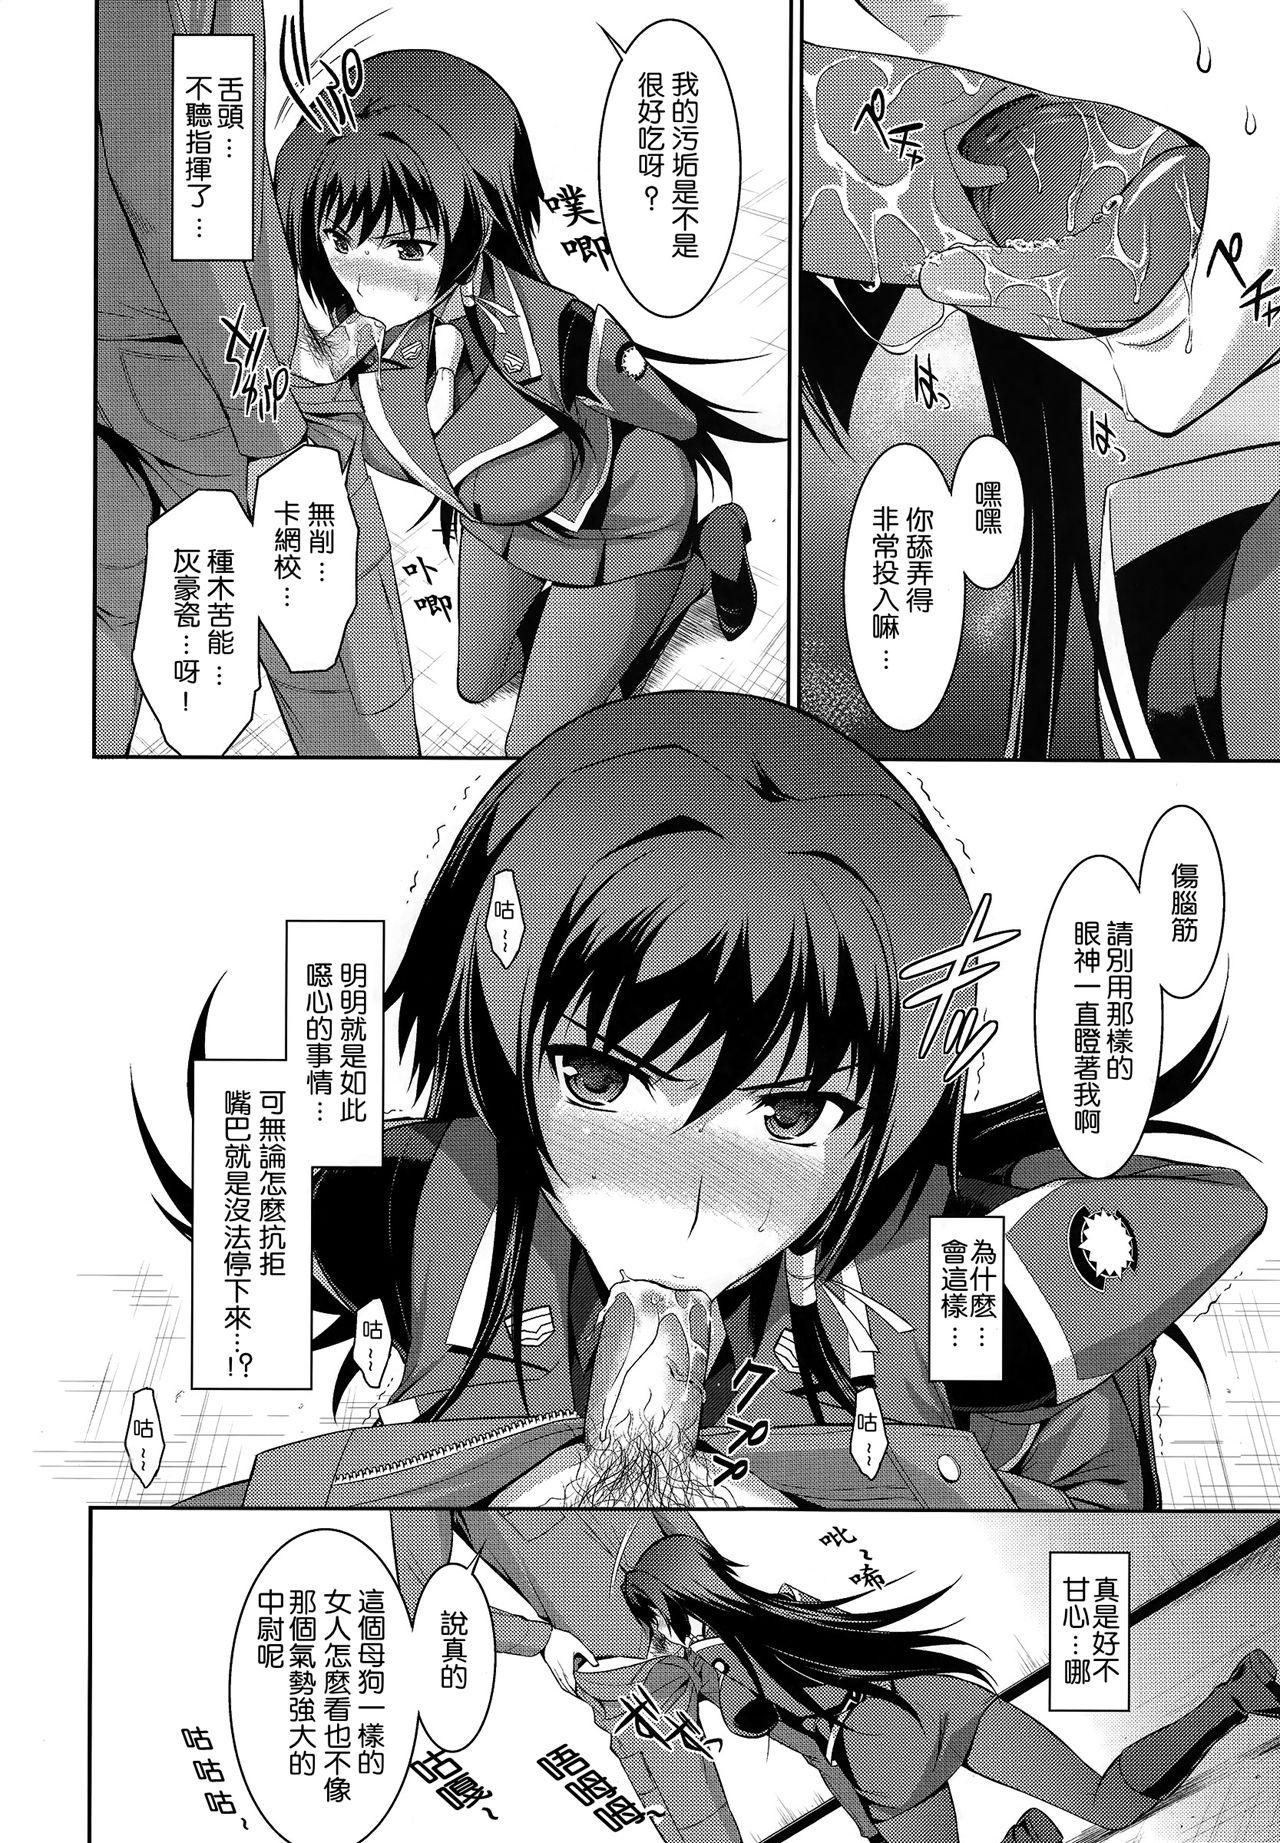 Blow Job Contest Ouka Chiru! - Muv-luv alternative total eclipse Blonde - Page 12